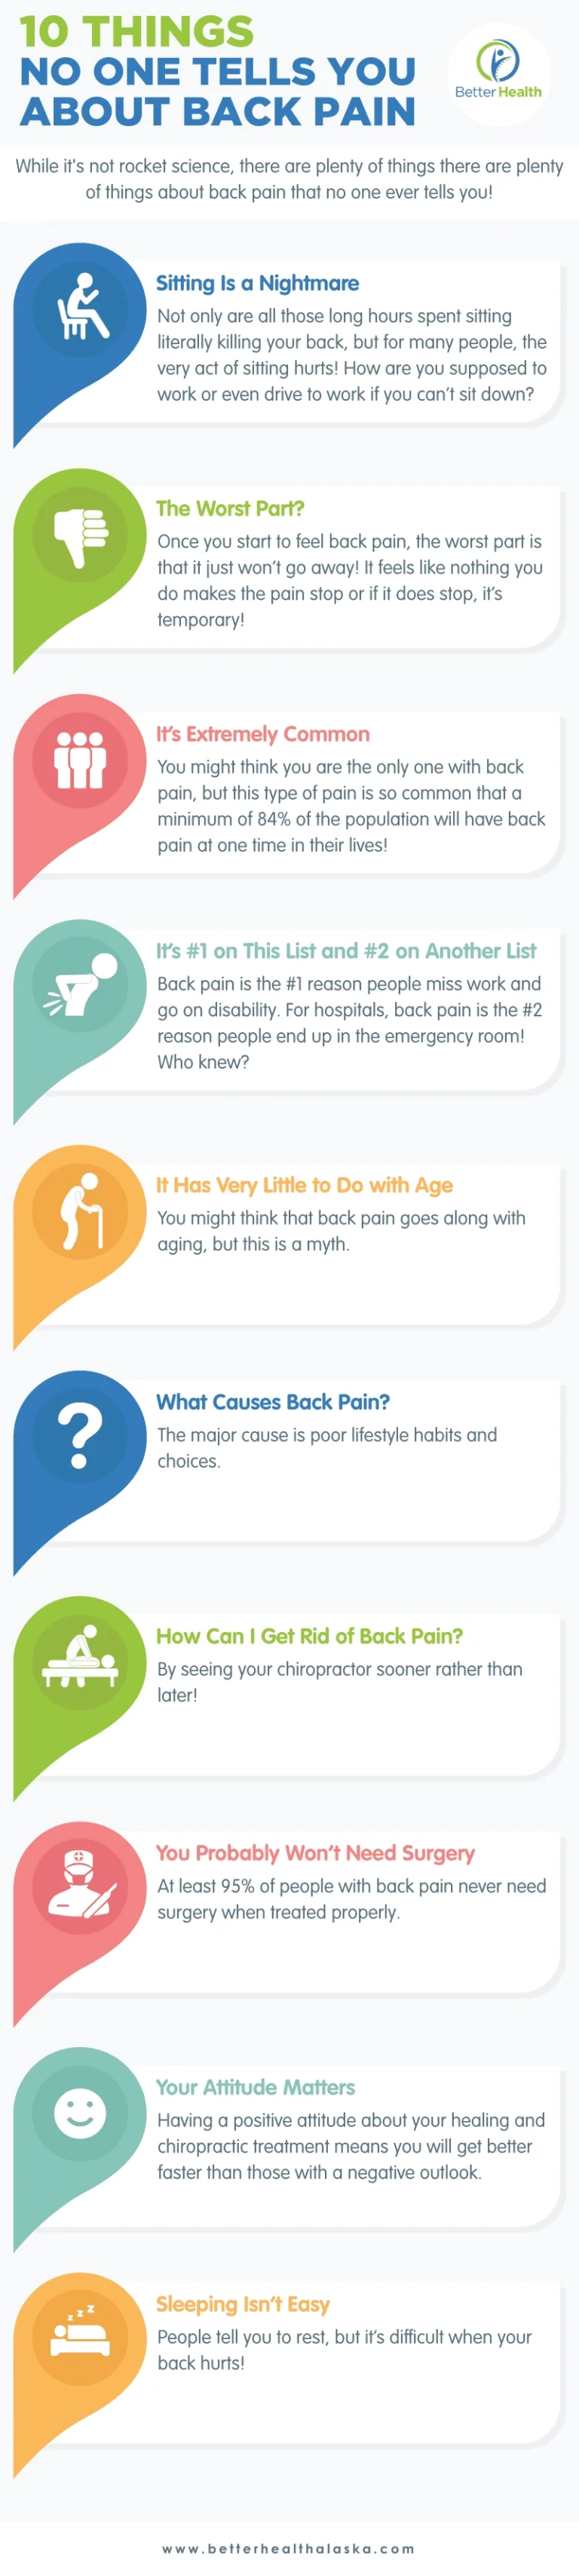 An infographic about 10 things regarding back pain.